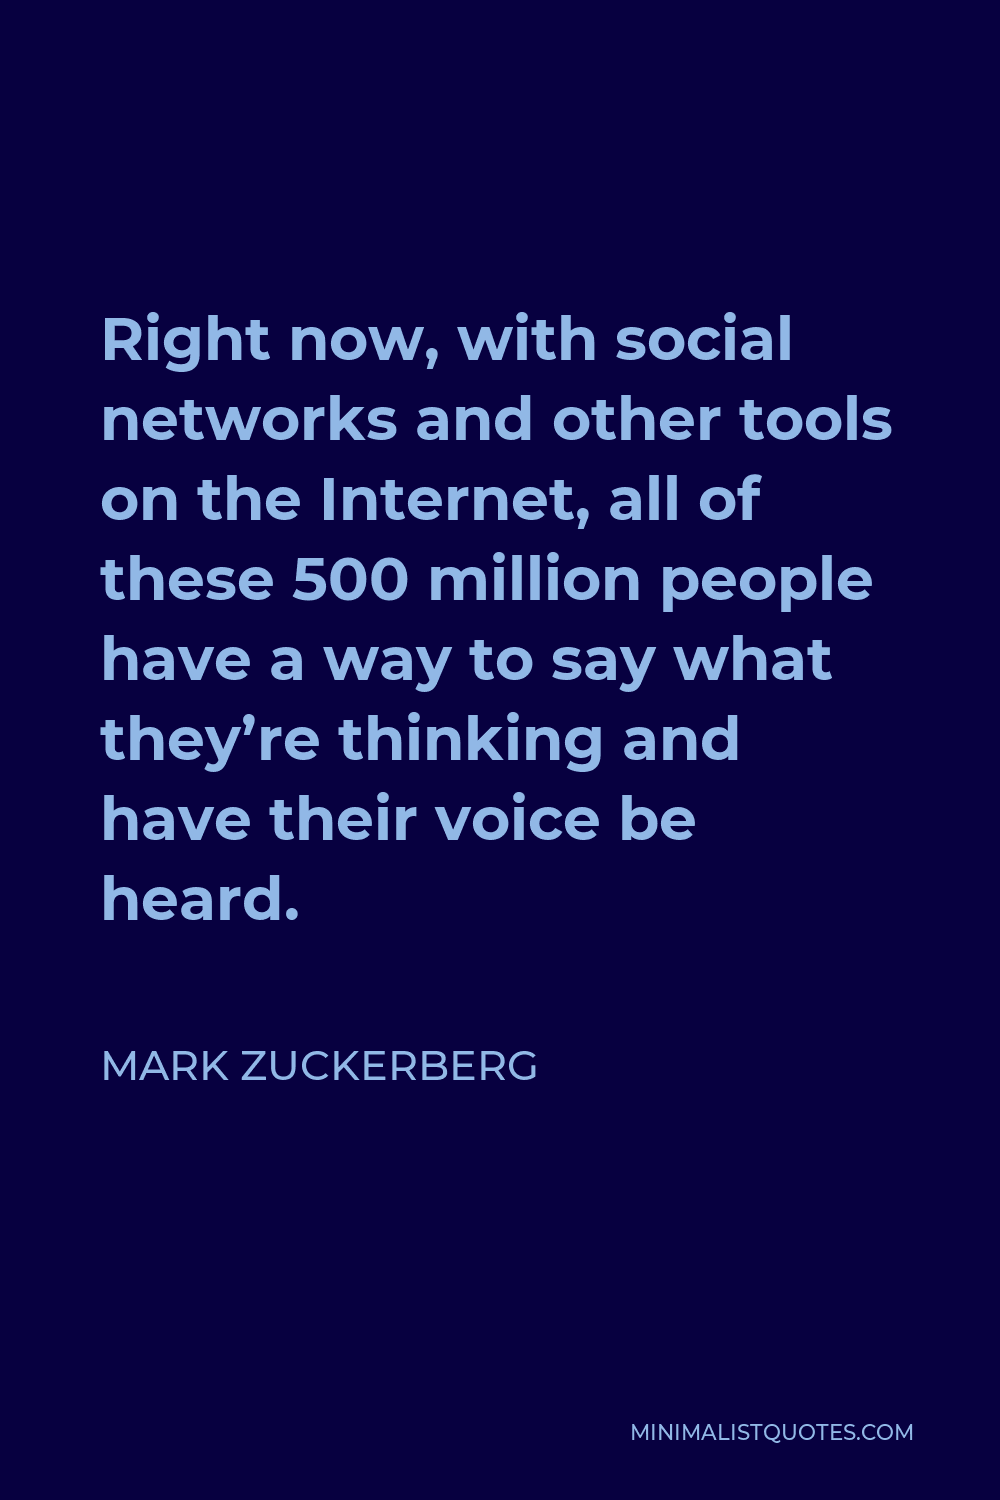 Mark Zuckerberg Quote - Right now, with social networks and other tools on the Internet, all of these 500 million people have a way to say what they’re thinking and have their voice be heard.